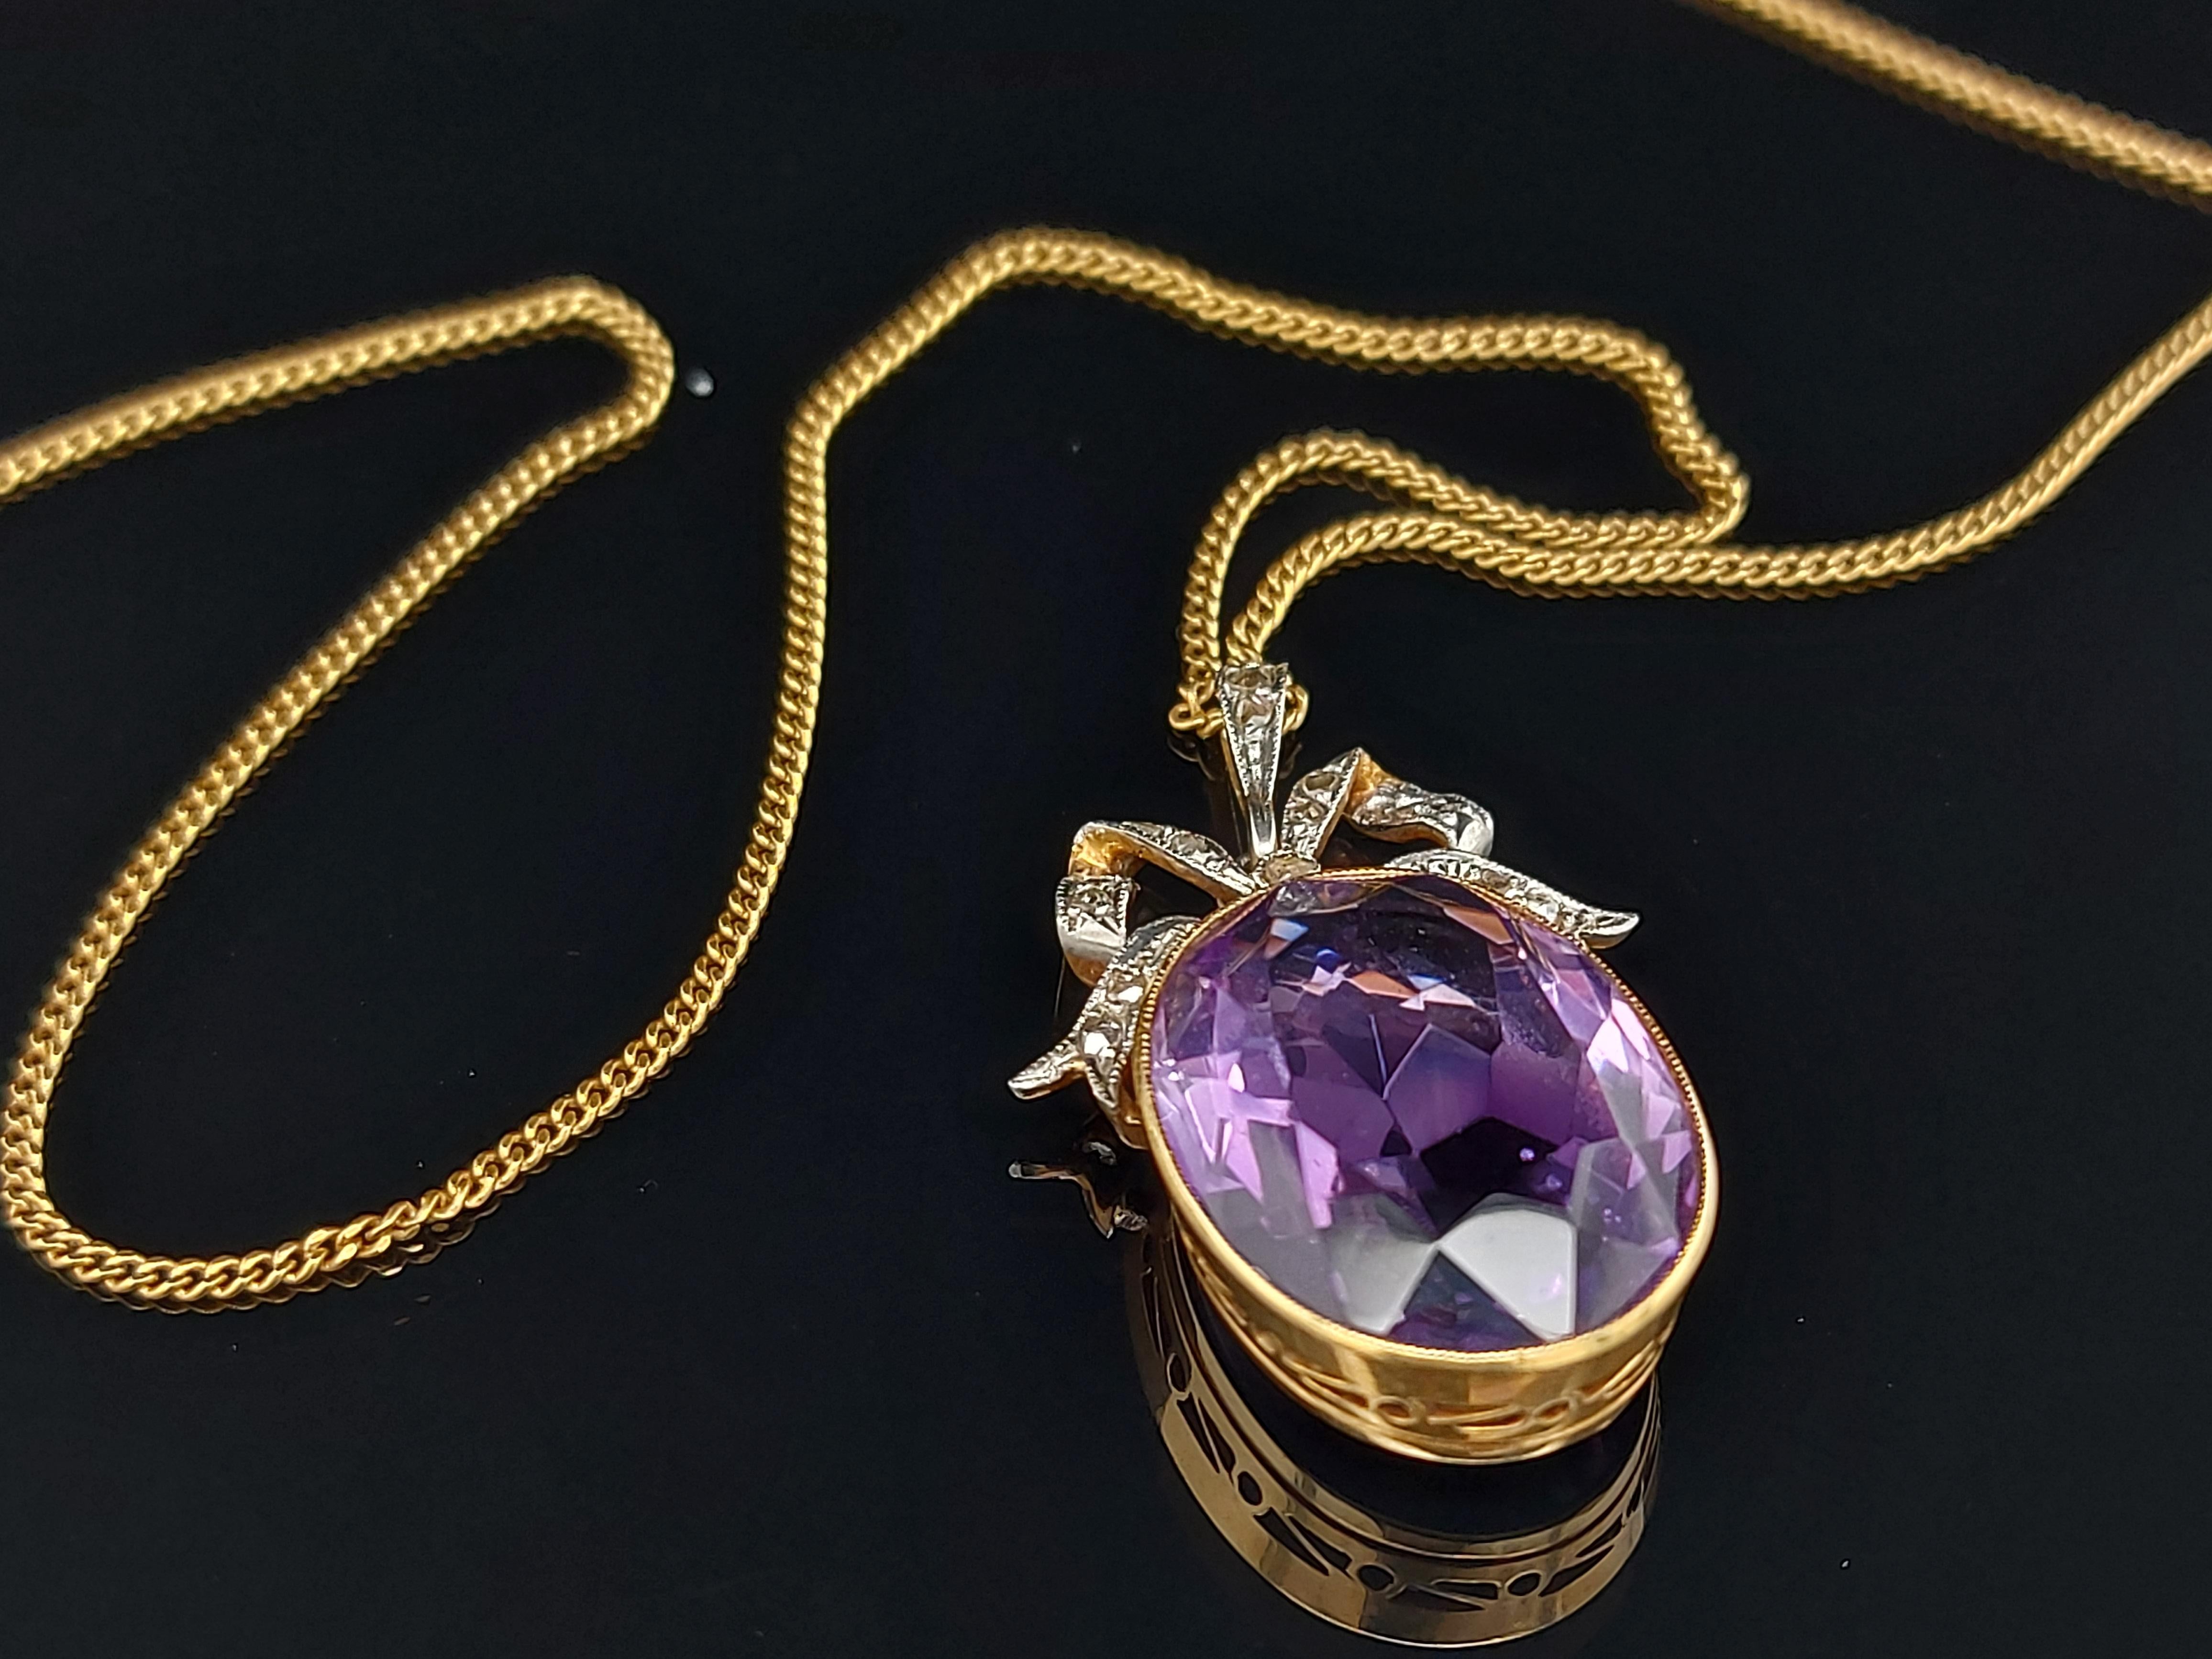 White and Yellow Gold Pendant Necklace With Big Amethyst and Rose cut Diamonds 

Diamonds: 17 rose cut diamonds

Amethyst: Length 13.7 mm x Height 18 mm

Material: 18 kt yellow and white gold

Measurements: Length 19.2 mm x Height 31 mm x Width 8